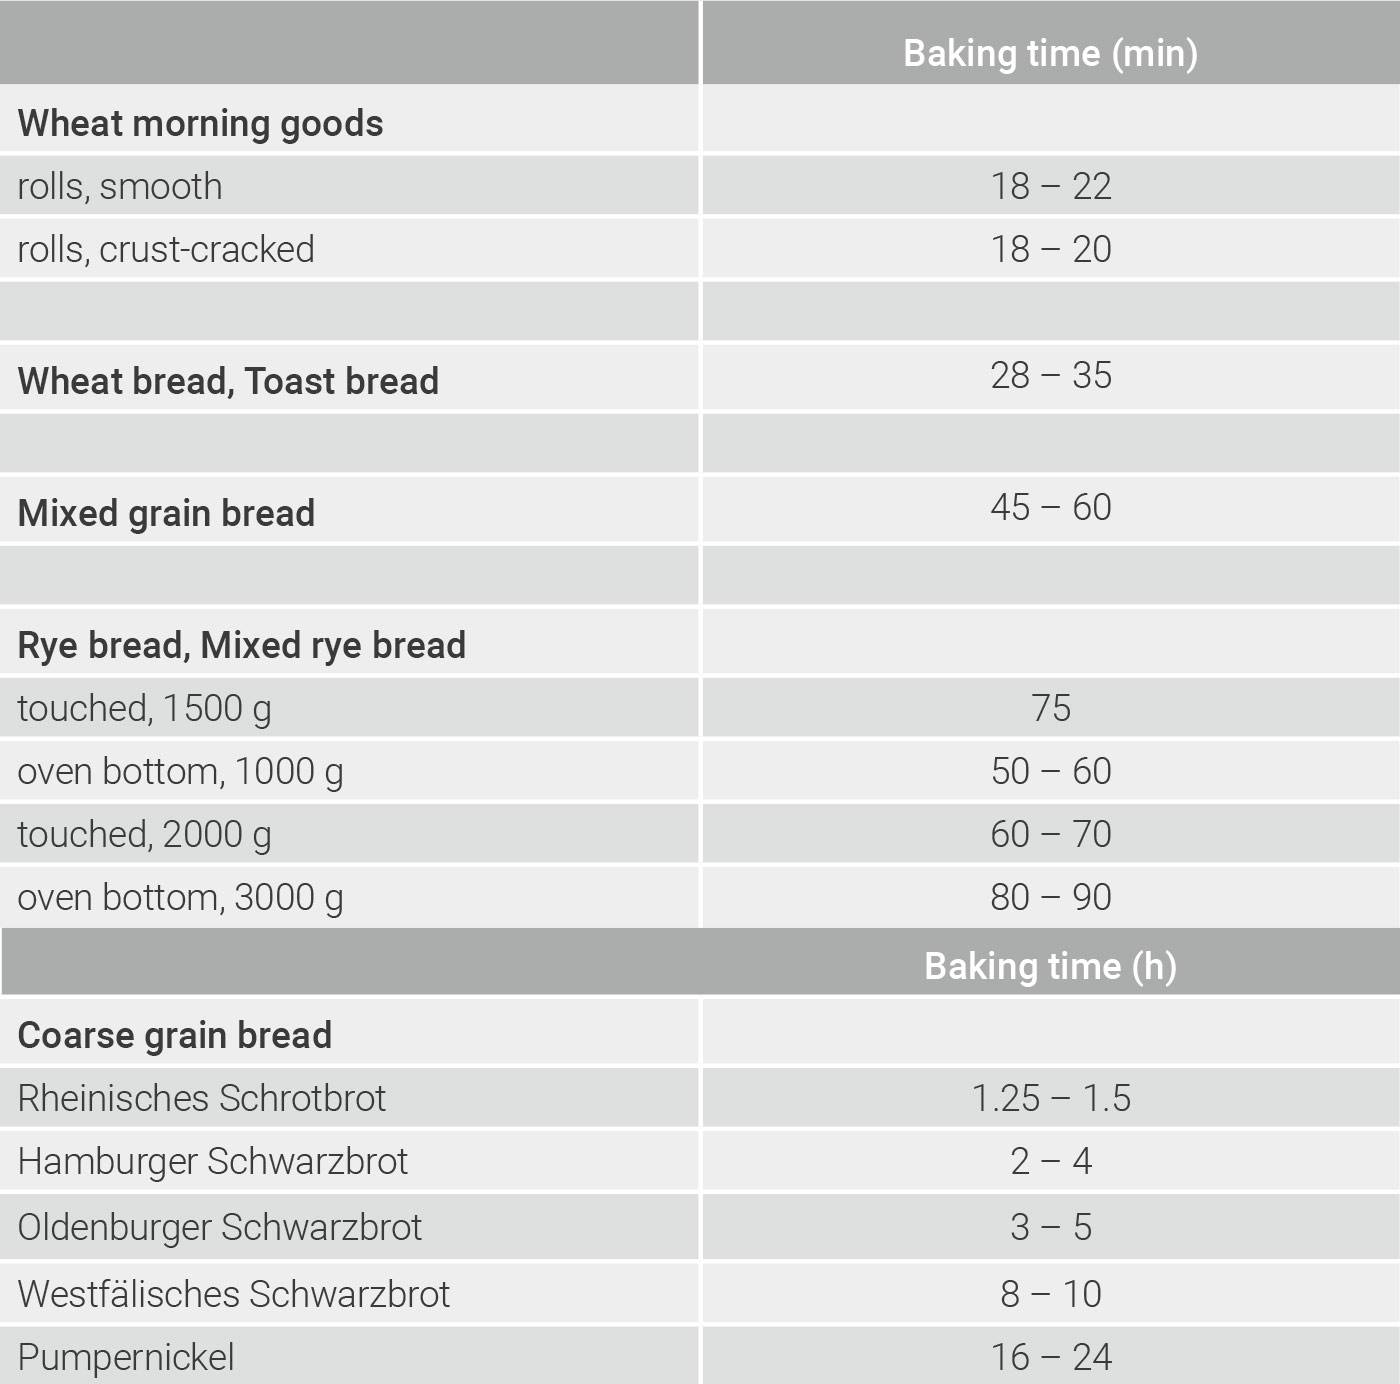 Baking times for different types of baked goods